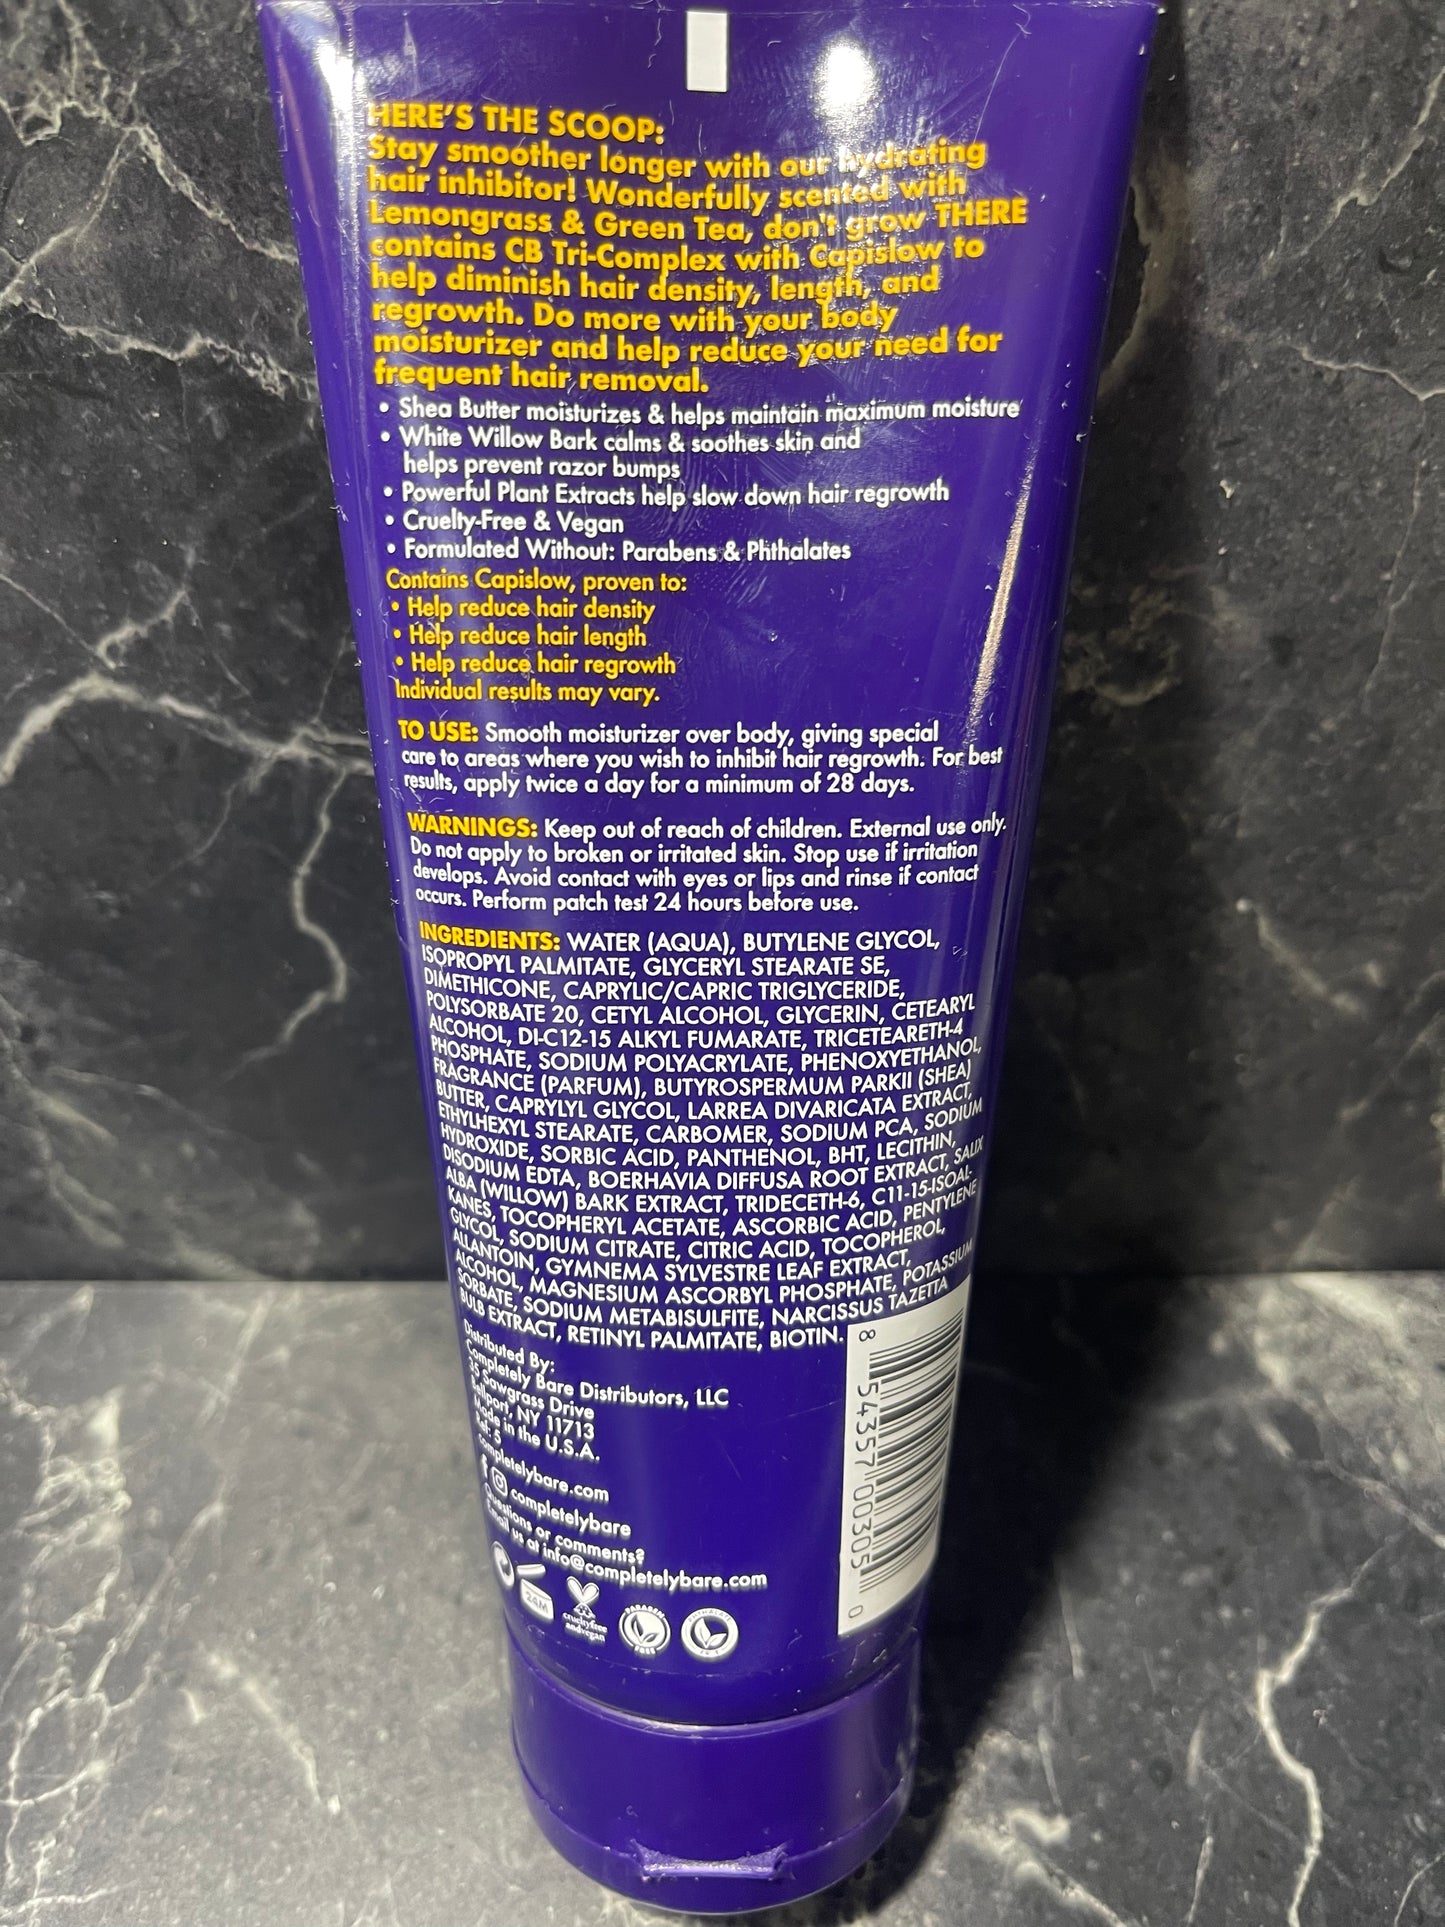 Completely Bare Don't Grow There Body Moisturizer - Hair Inhibitor 6.7 oz